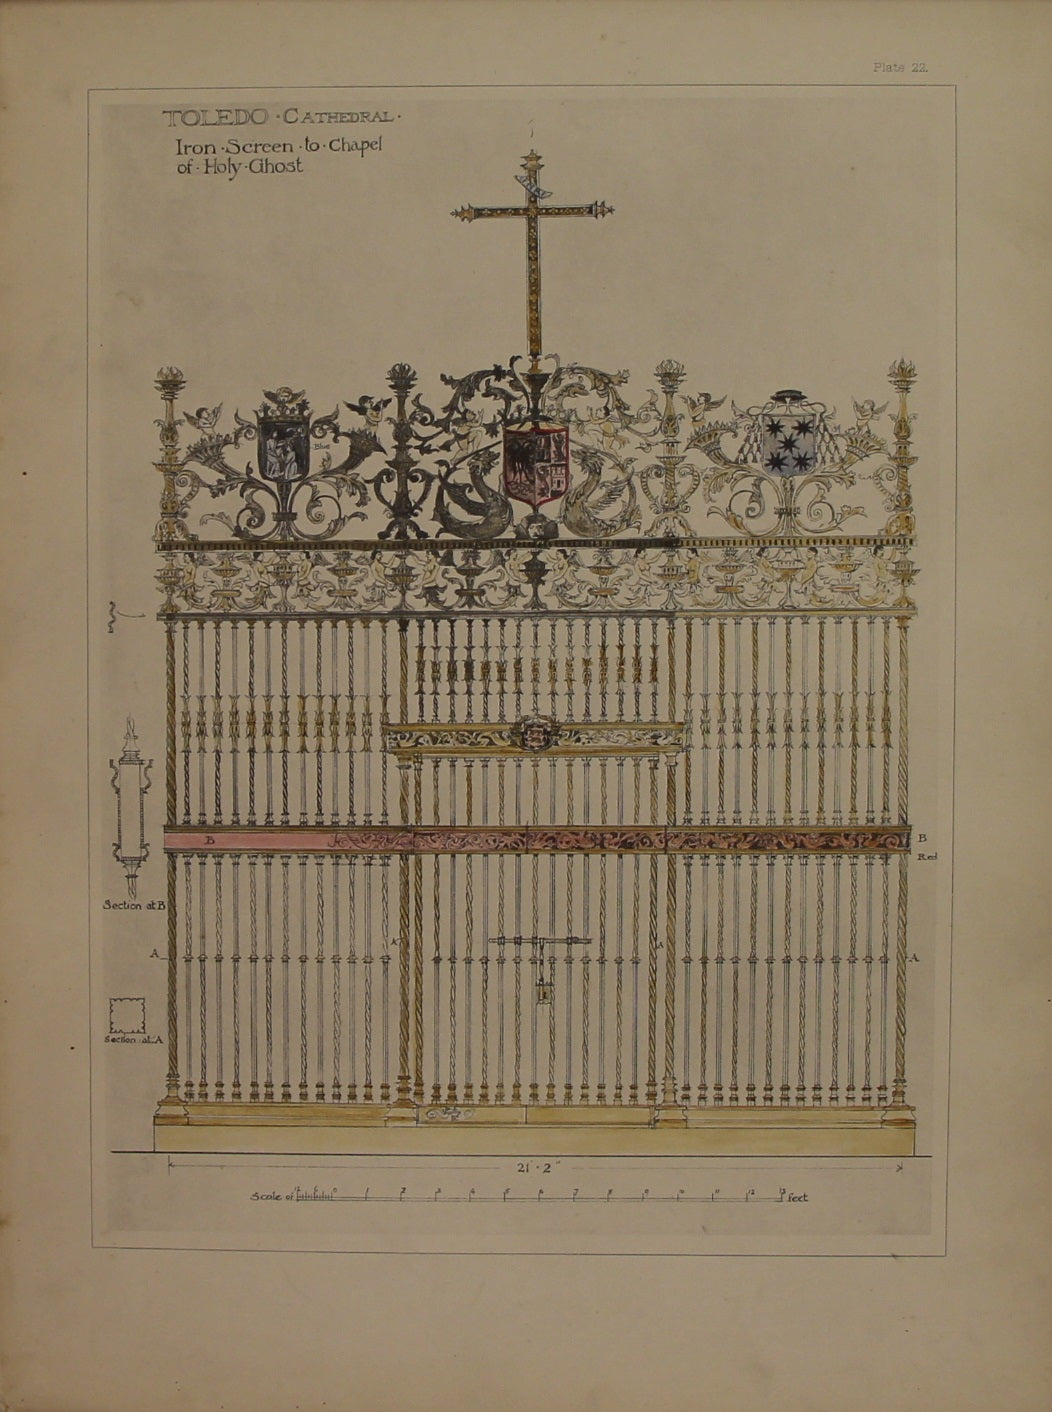 Architecture, Spanish Renaissance, Plate 22, Toledo, The Cathedral, Iron Screen to the Chapel of the Holy Ghost,